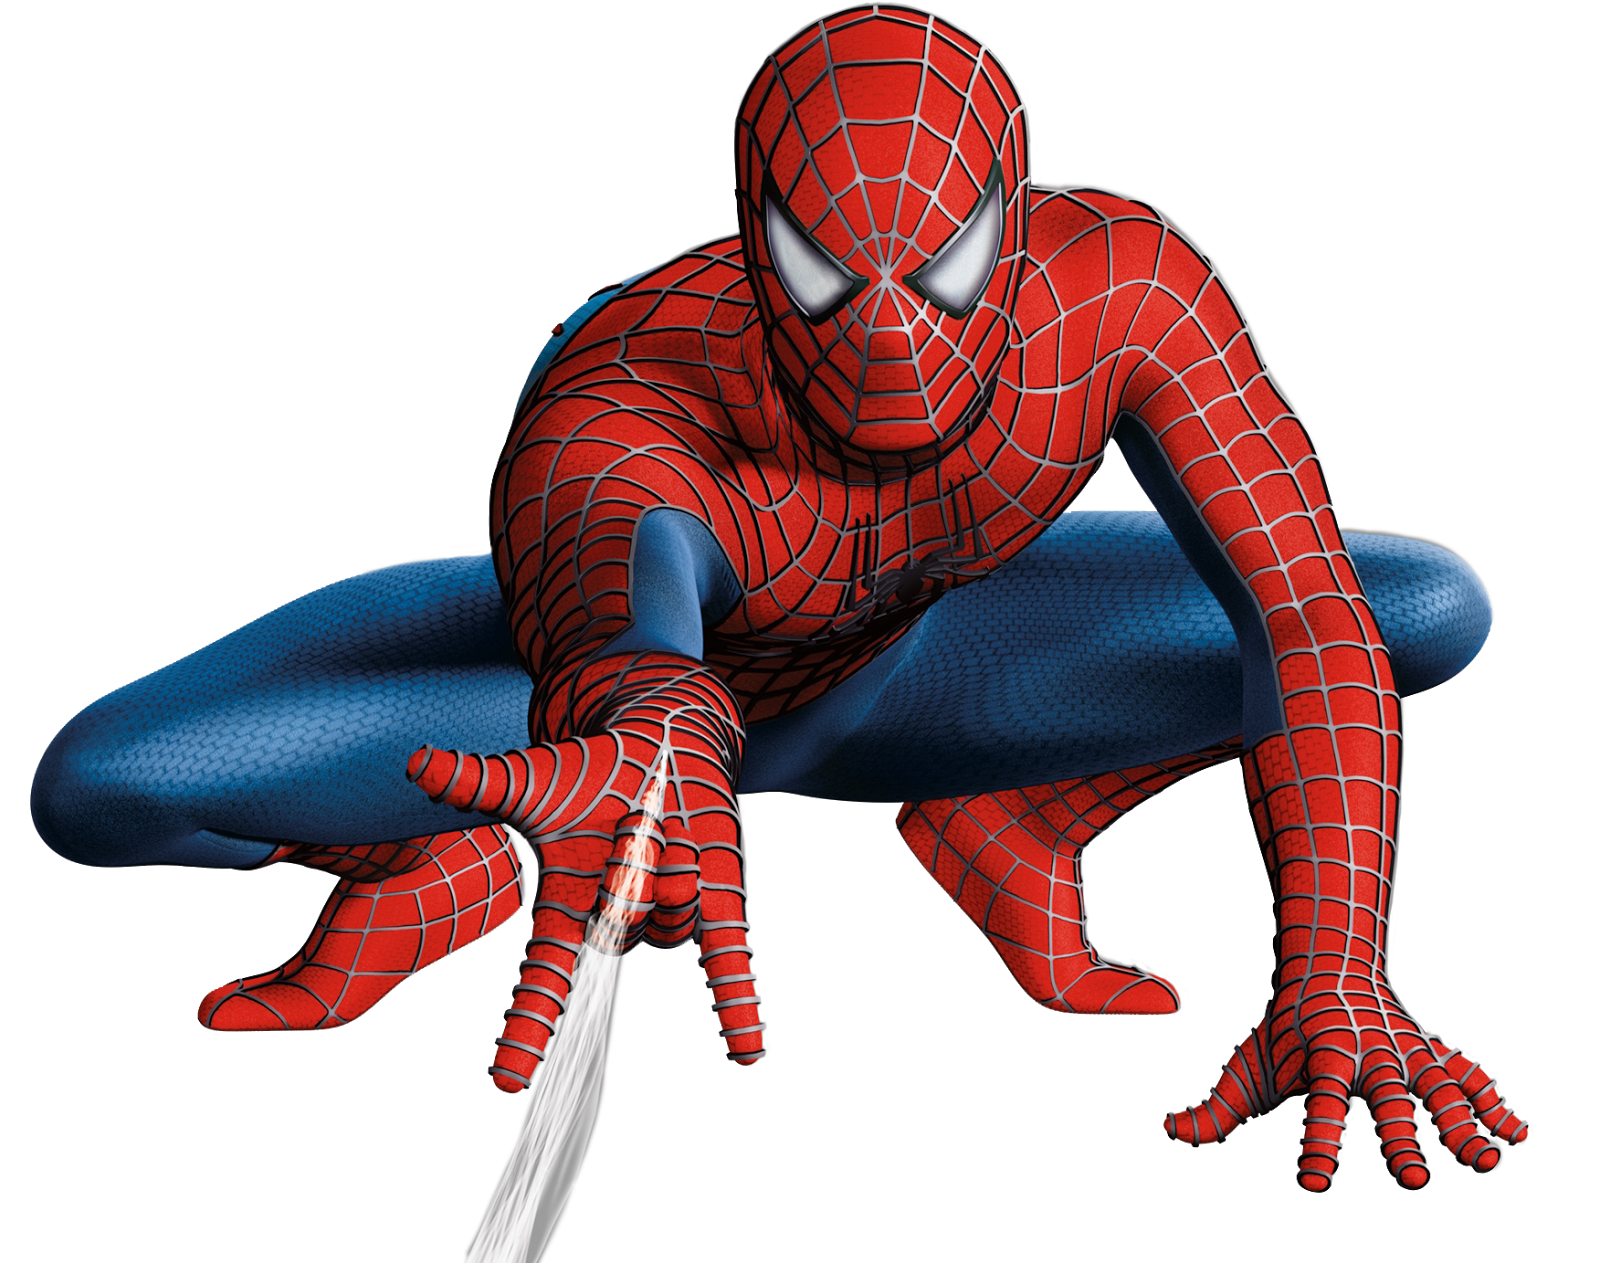 Spiderman, Spider Web, Sitting, Spiderman Costume PNG Transparent  Background, Free Download #47343 - FreeIconsPNG